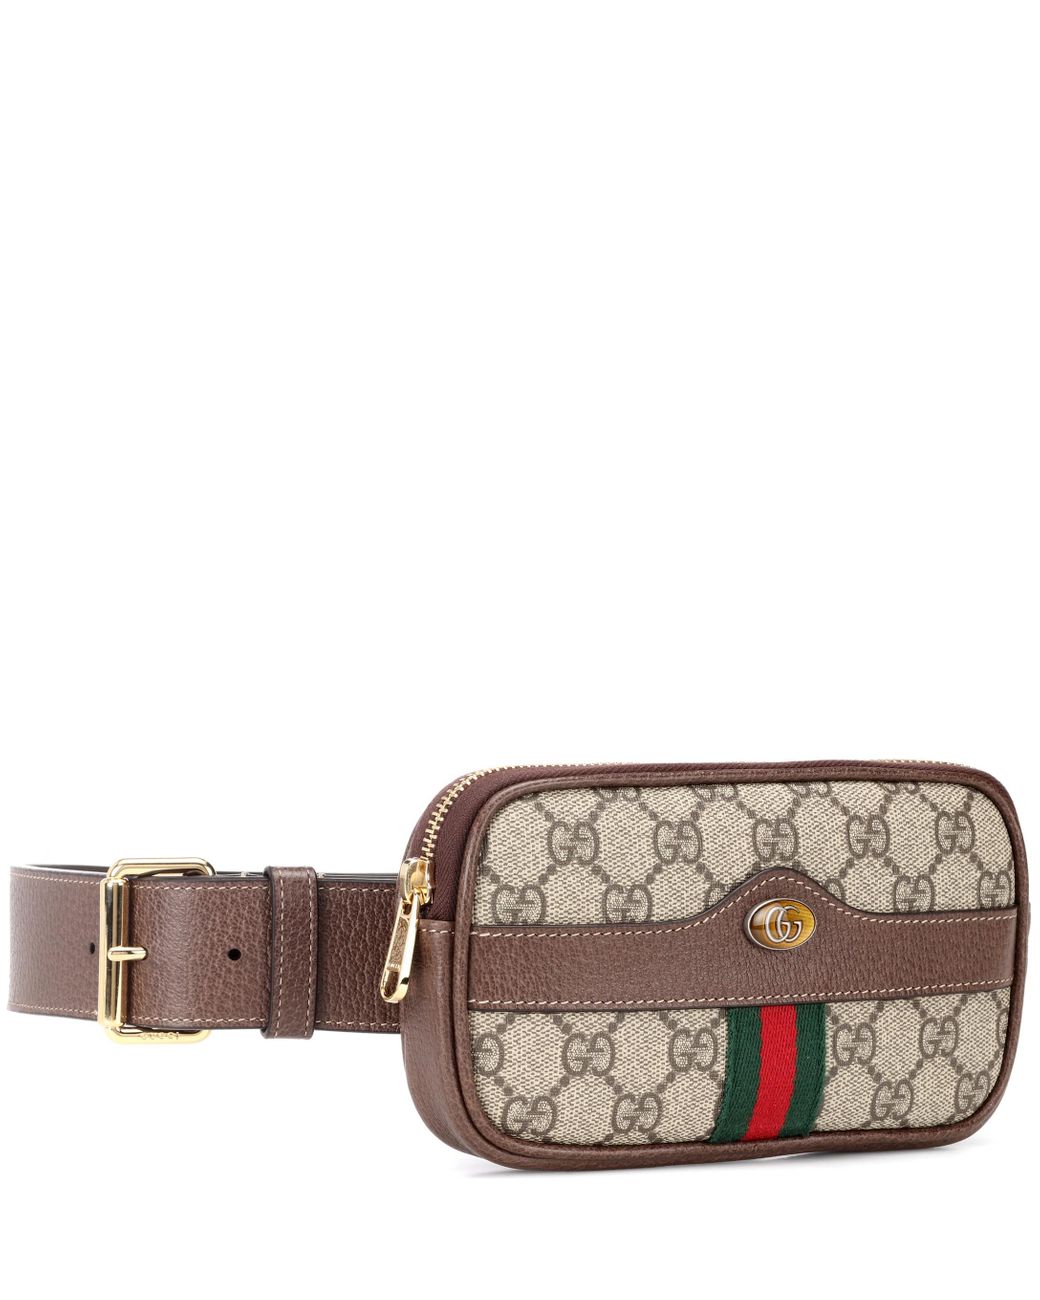 Gucci Ophidia Red Suede Belt Bag Size 75/30 – The Global Collective Co.